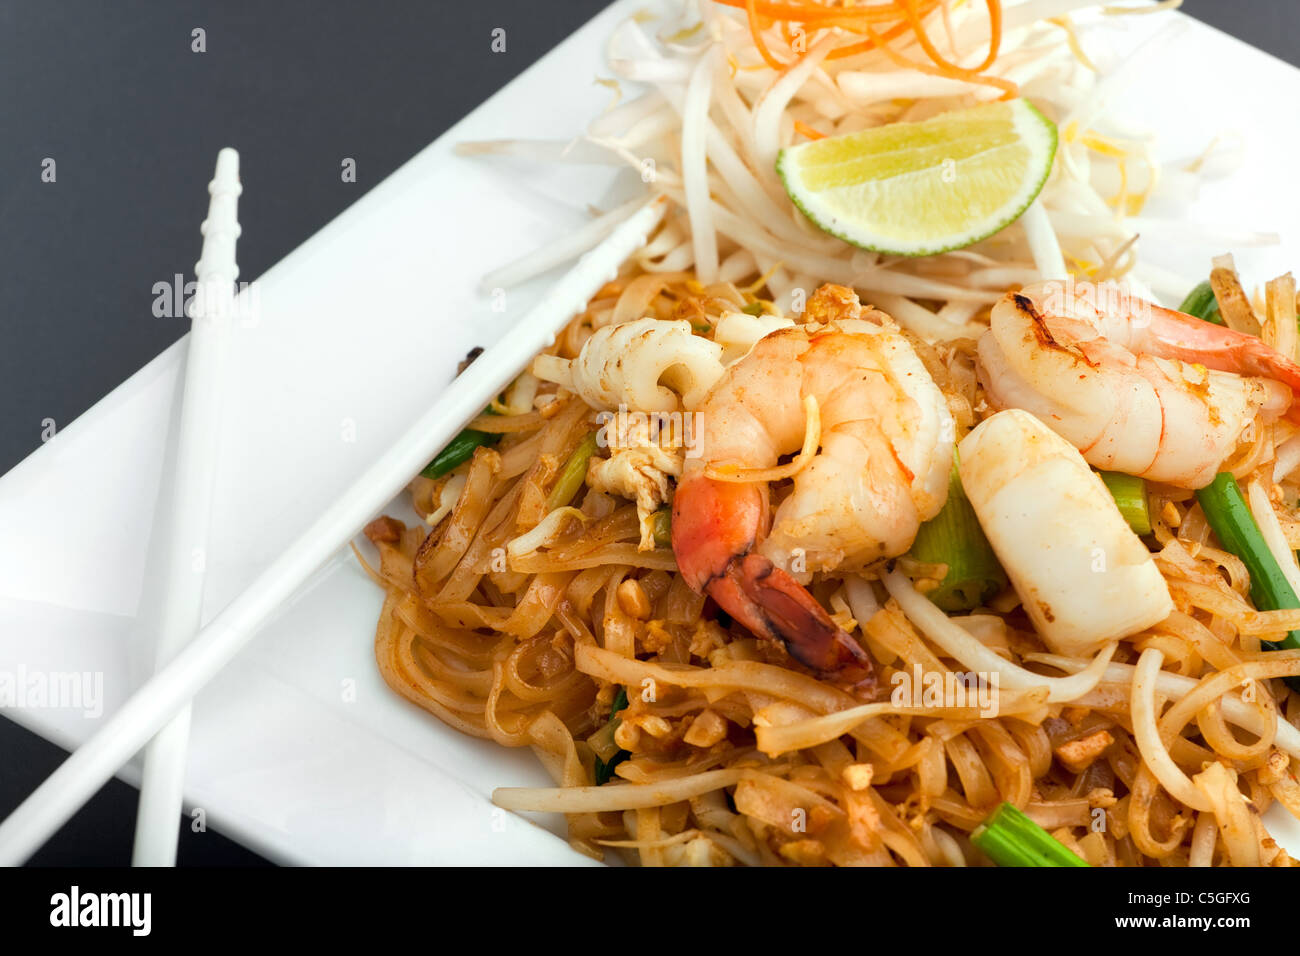 Seafood pad Thai dish of fried rice noodles on a square white plate with chopsticks and grated carrot garnish. Stock Photo